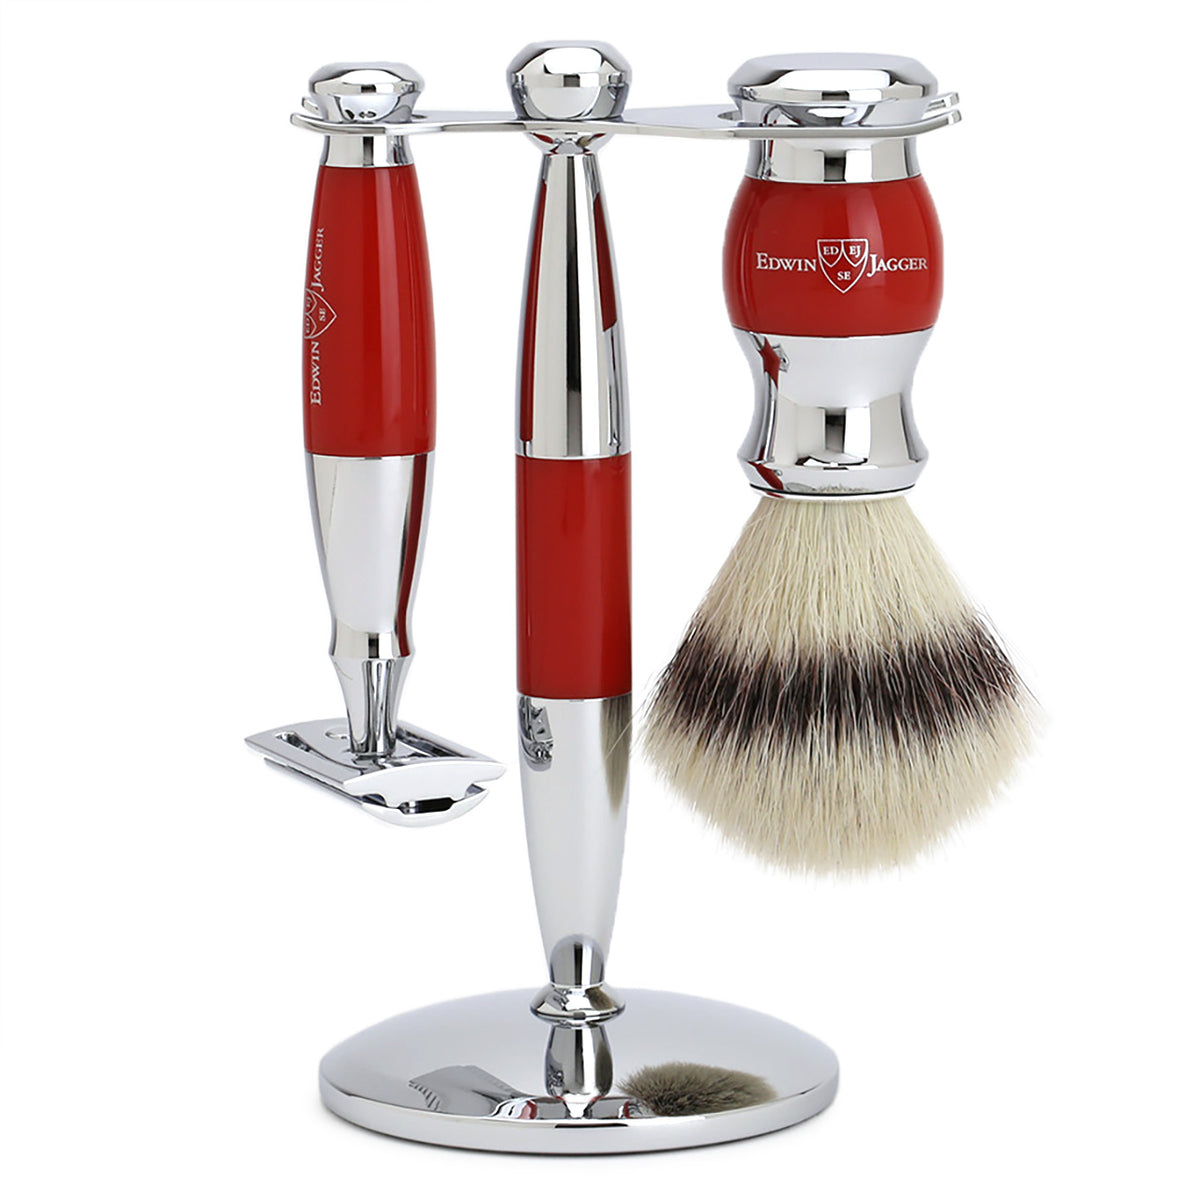 Edwin Jagger Shaving Set with Safety Razor, Shaving Brush and Stand - Red